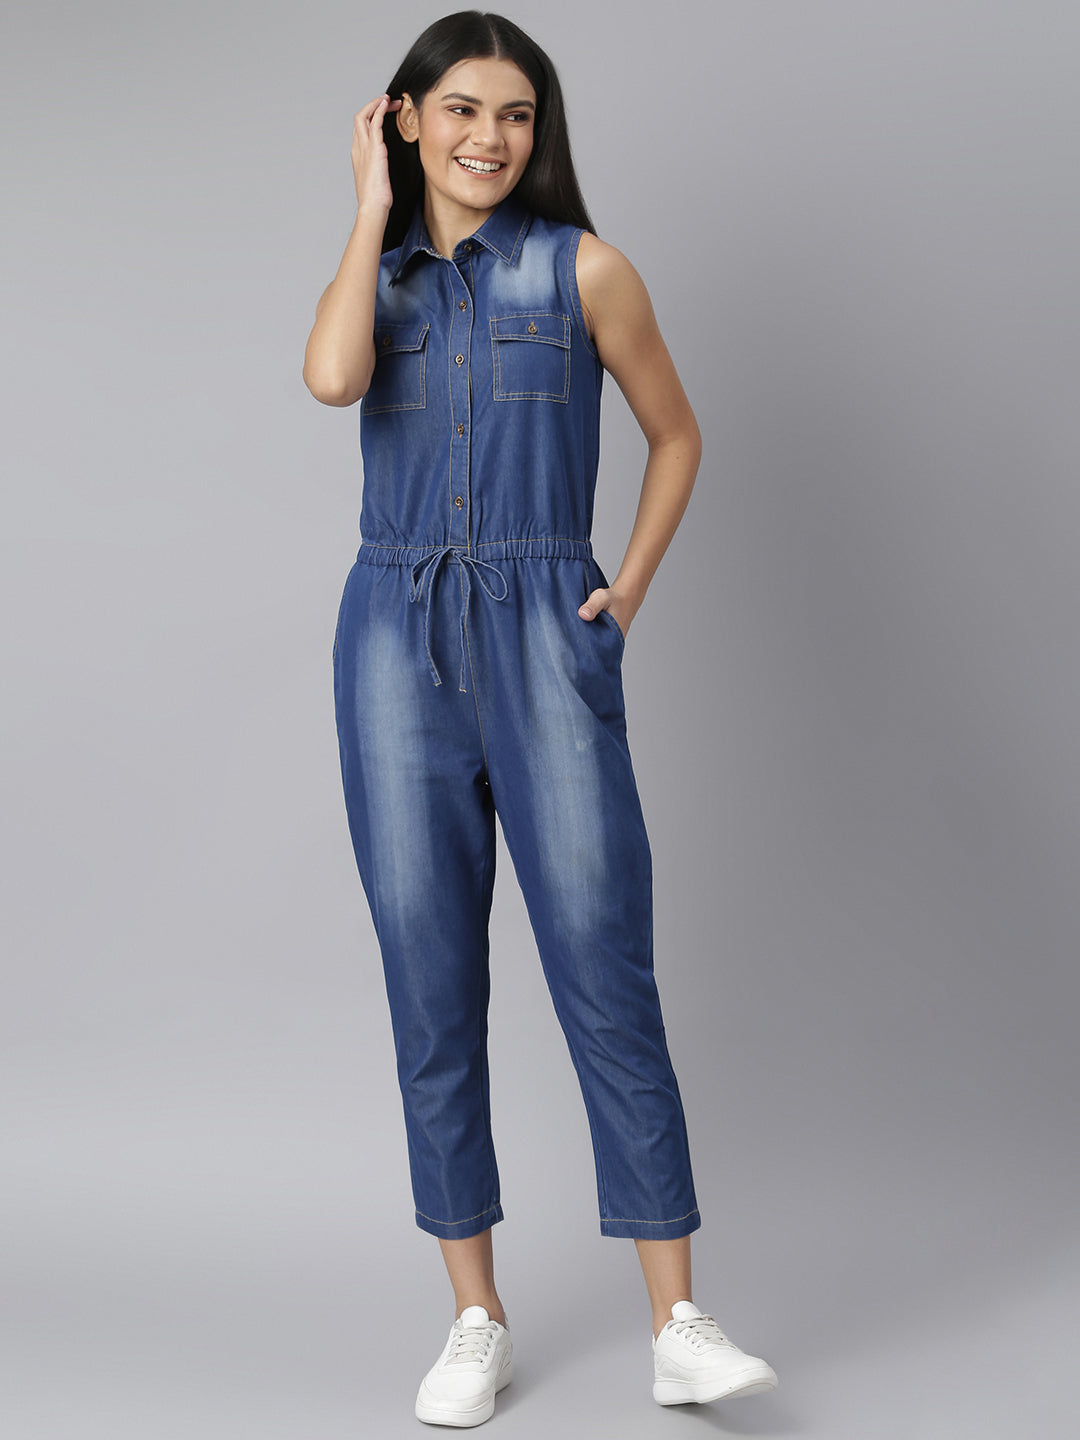 Buy QUECY Womens Denim Jumpsuit Adjustable Bib Overalls Ripped Jeans  Pants Blue M at Amazonin